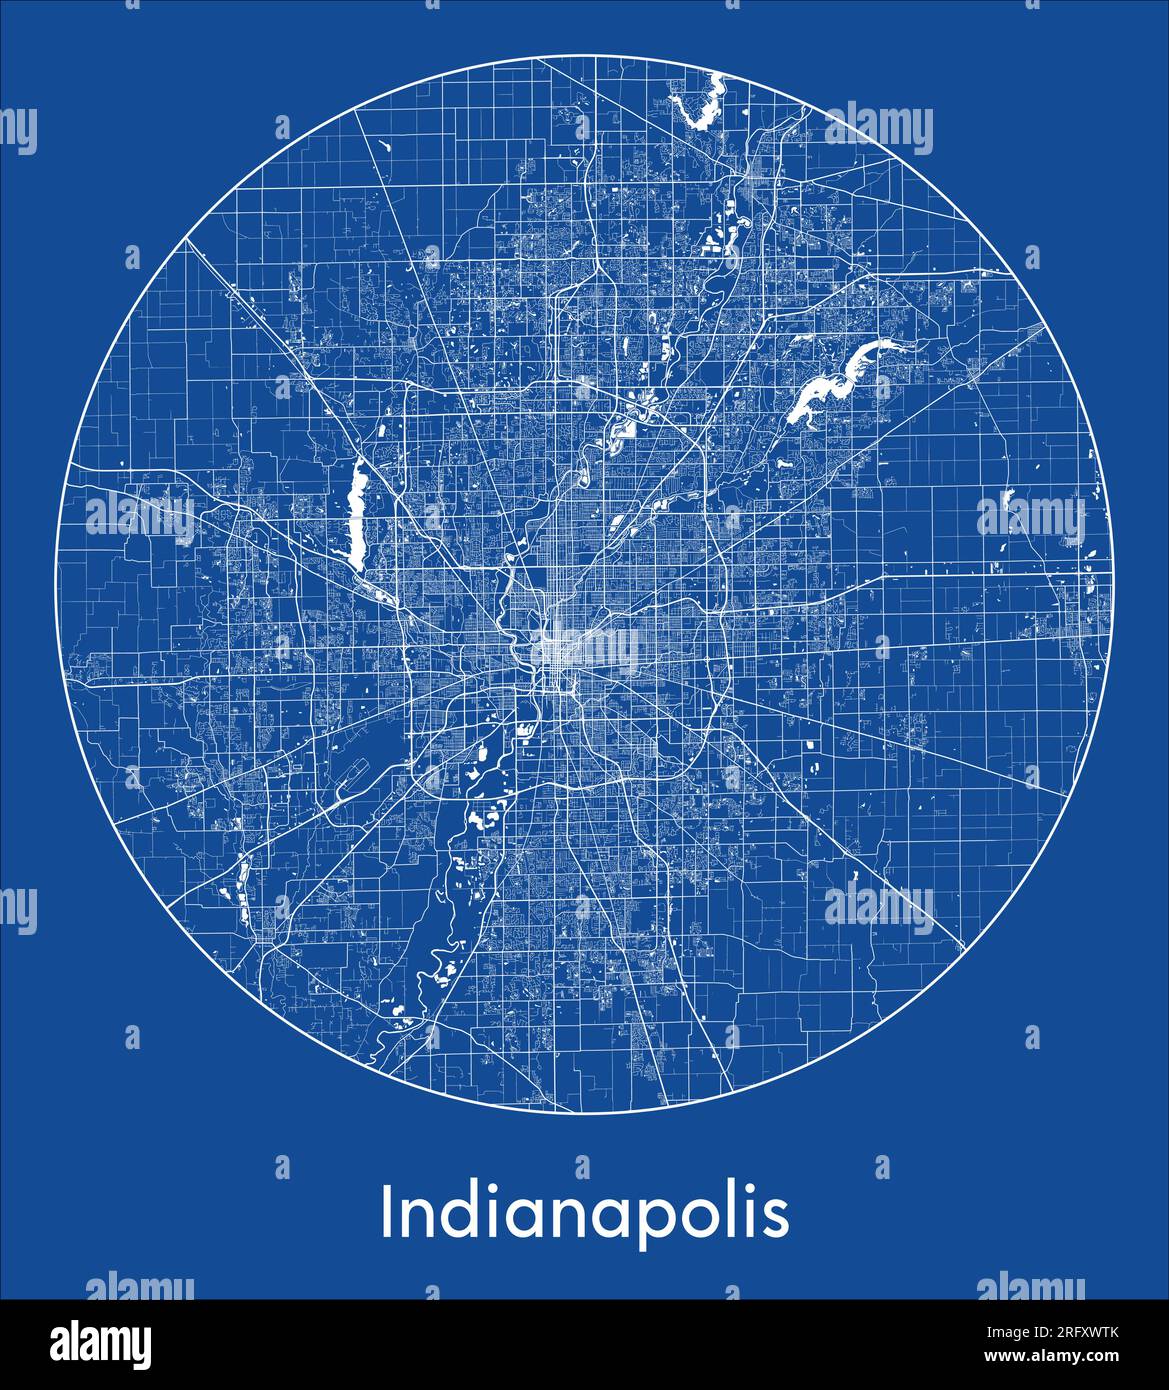 City Map Indianapolis United States North America blue print round Circle vector illustration Stock Vector